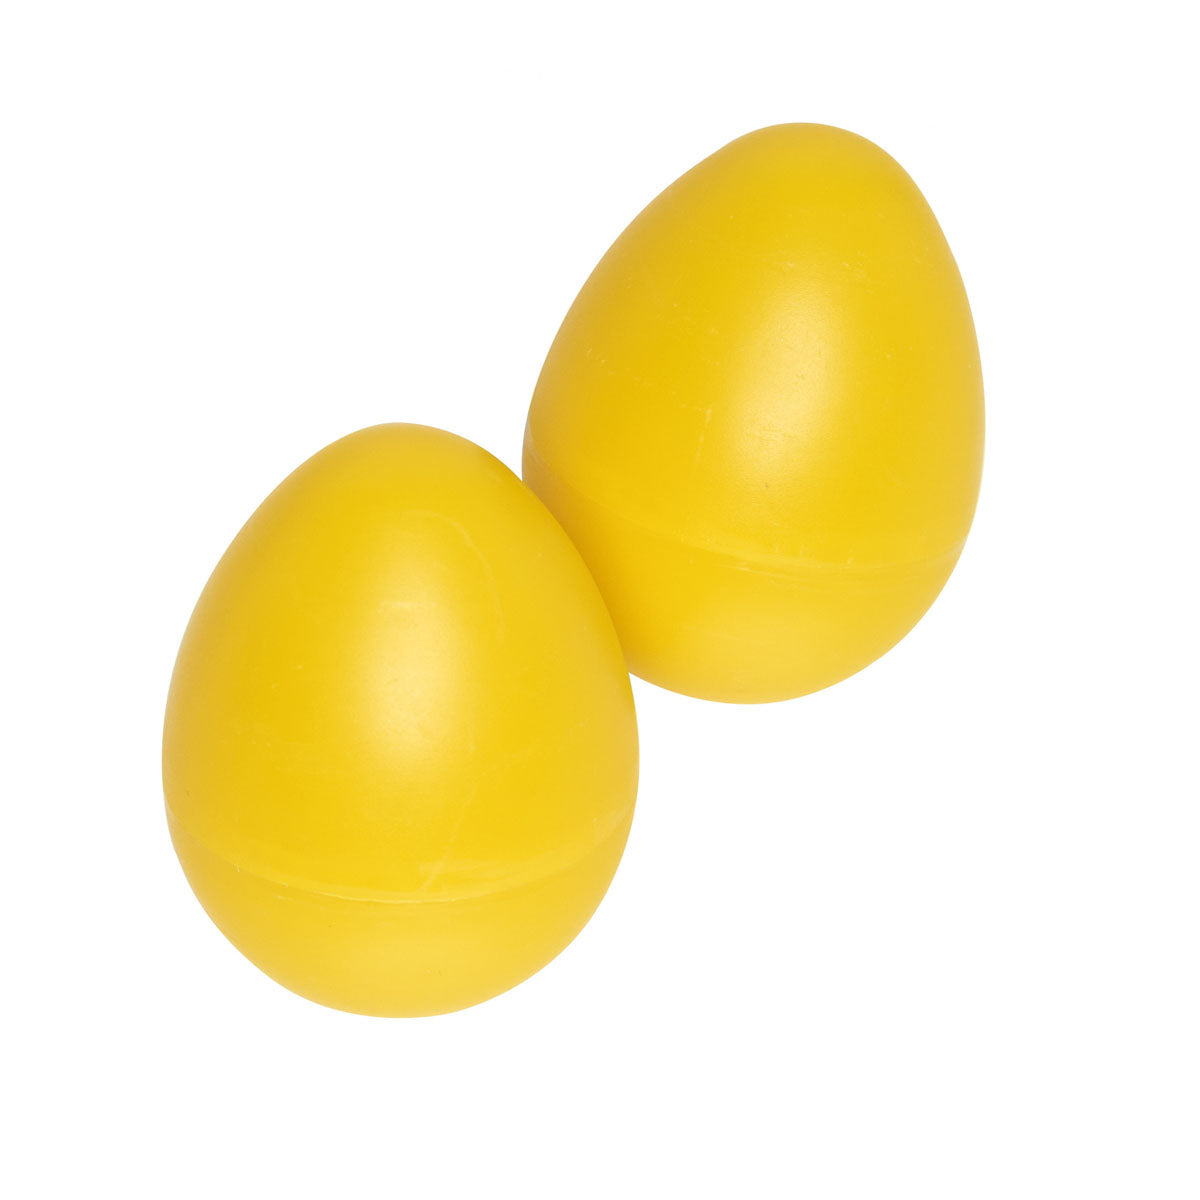 Stagg Egg Shakers in Yellow (Pack of 2) 45g